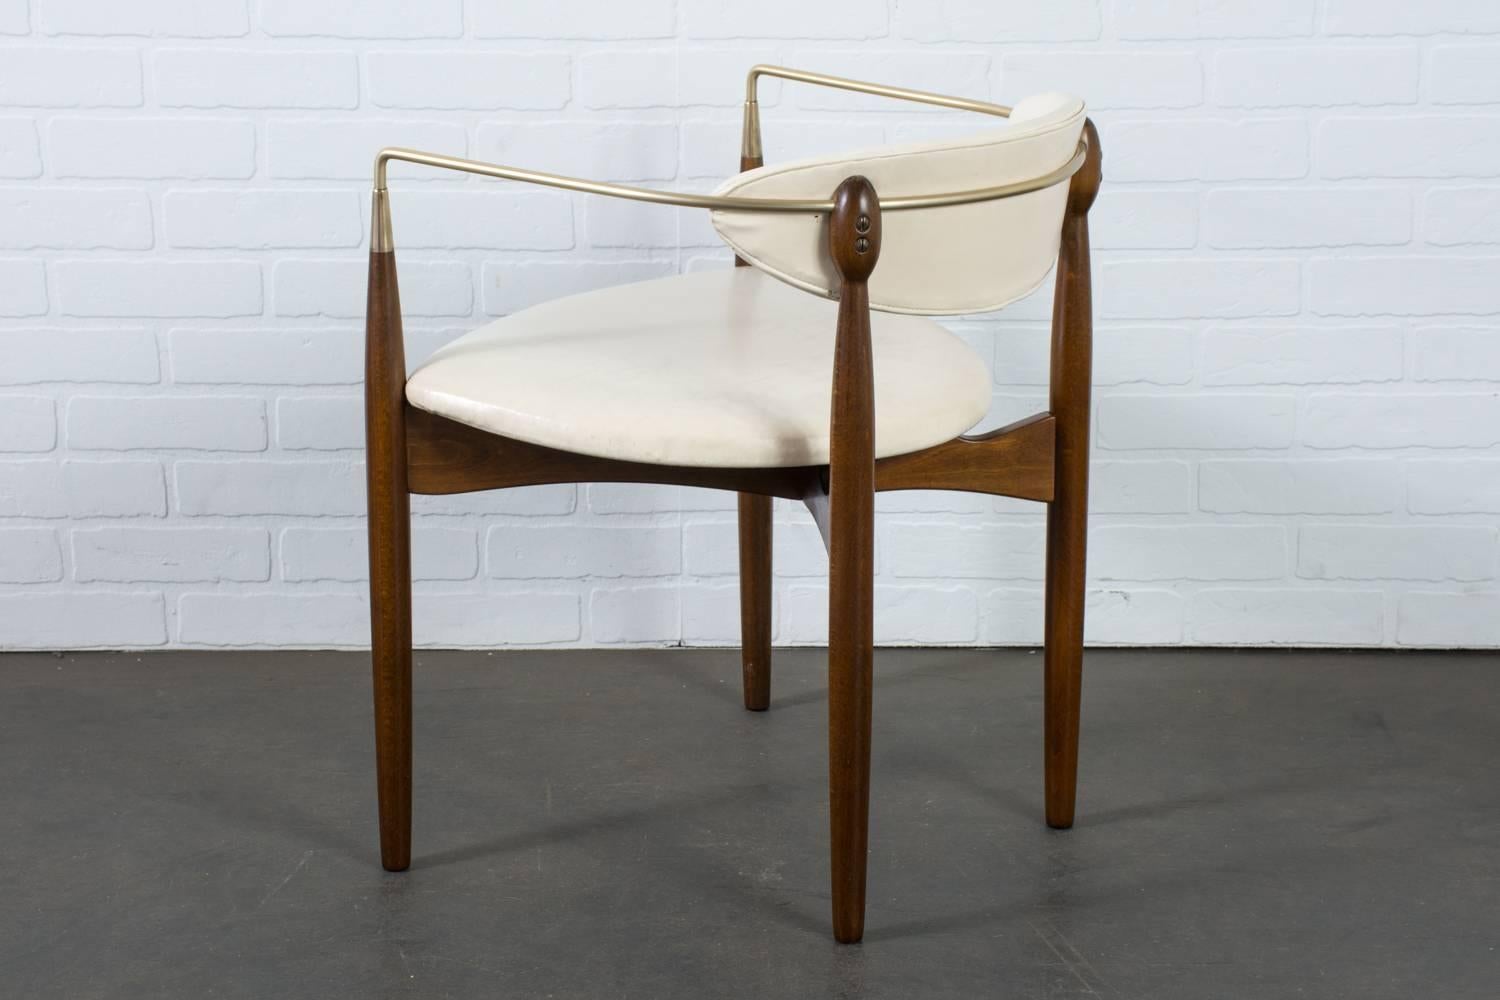 This vintage midcentury 'Viscount' chair was designed by Dan Johnson for Selig, circa 1950s. It features a wood frame with a walnut finish, slender brass tubing that wraps around the back of the backrest and bends attaching to the top of the tapered